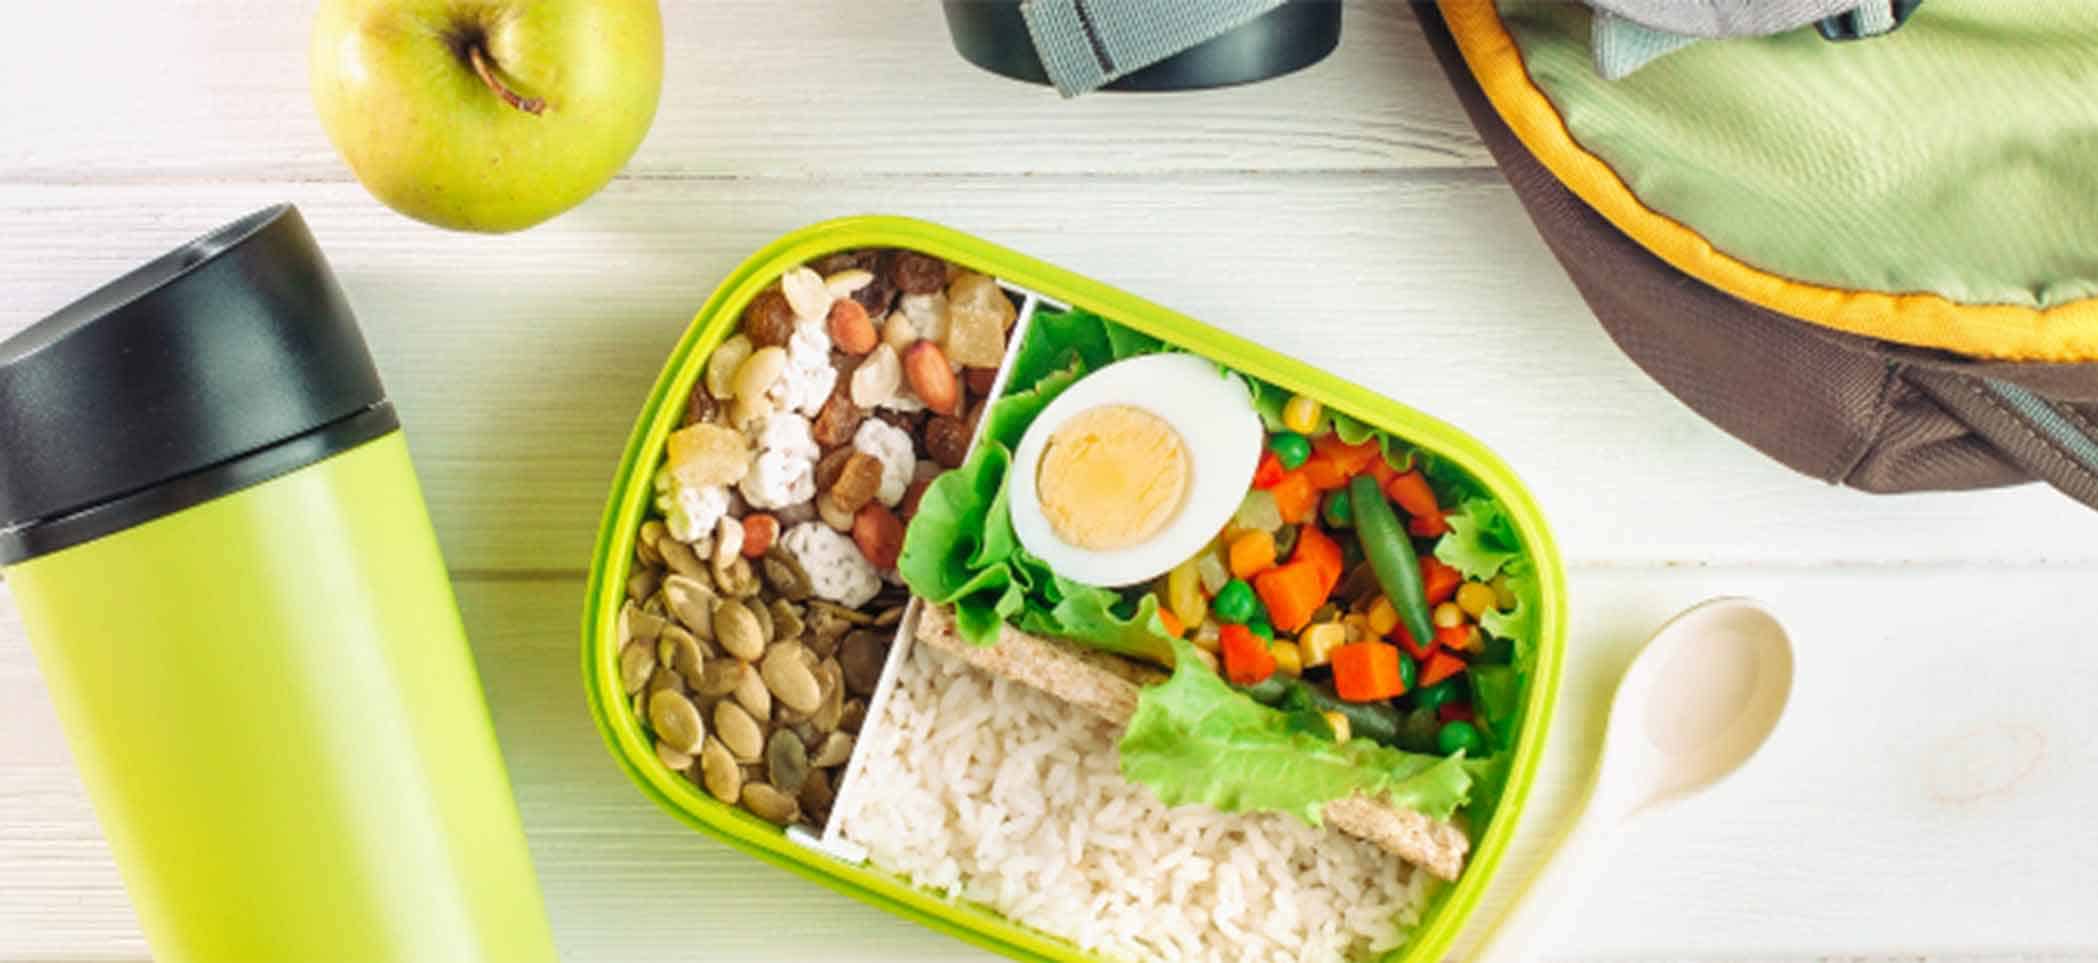 a lunchbox that holds nuts, rice, salad, and hard-boiled egg